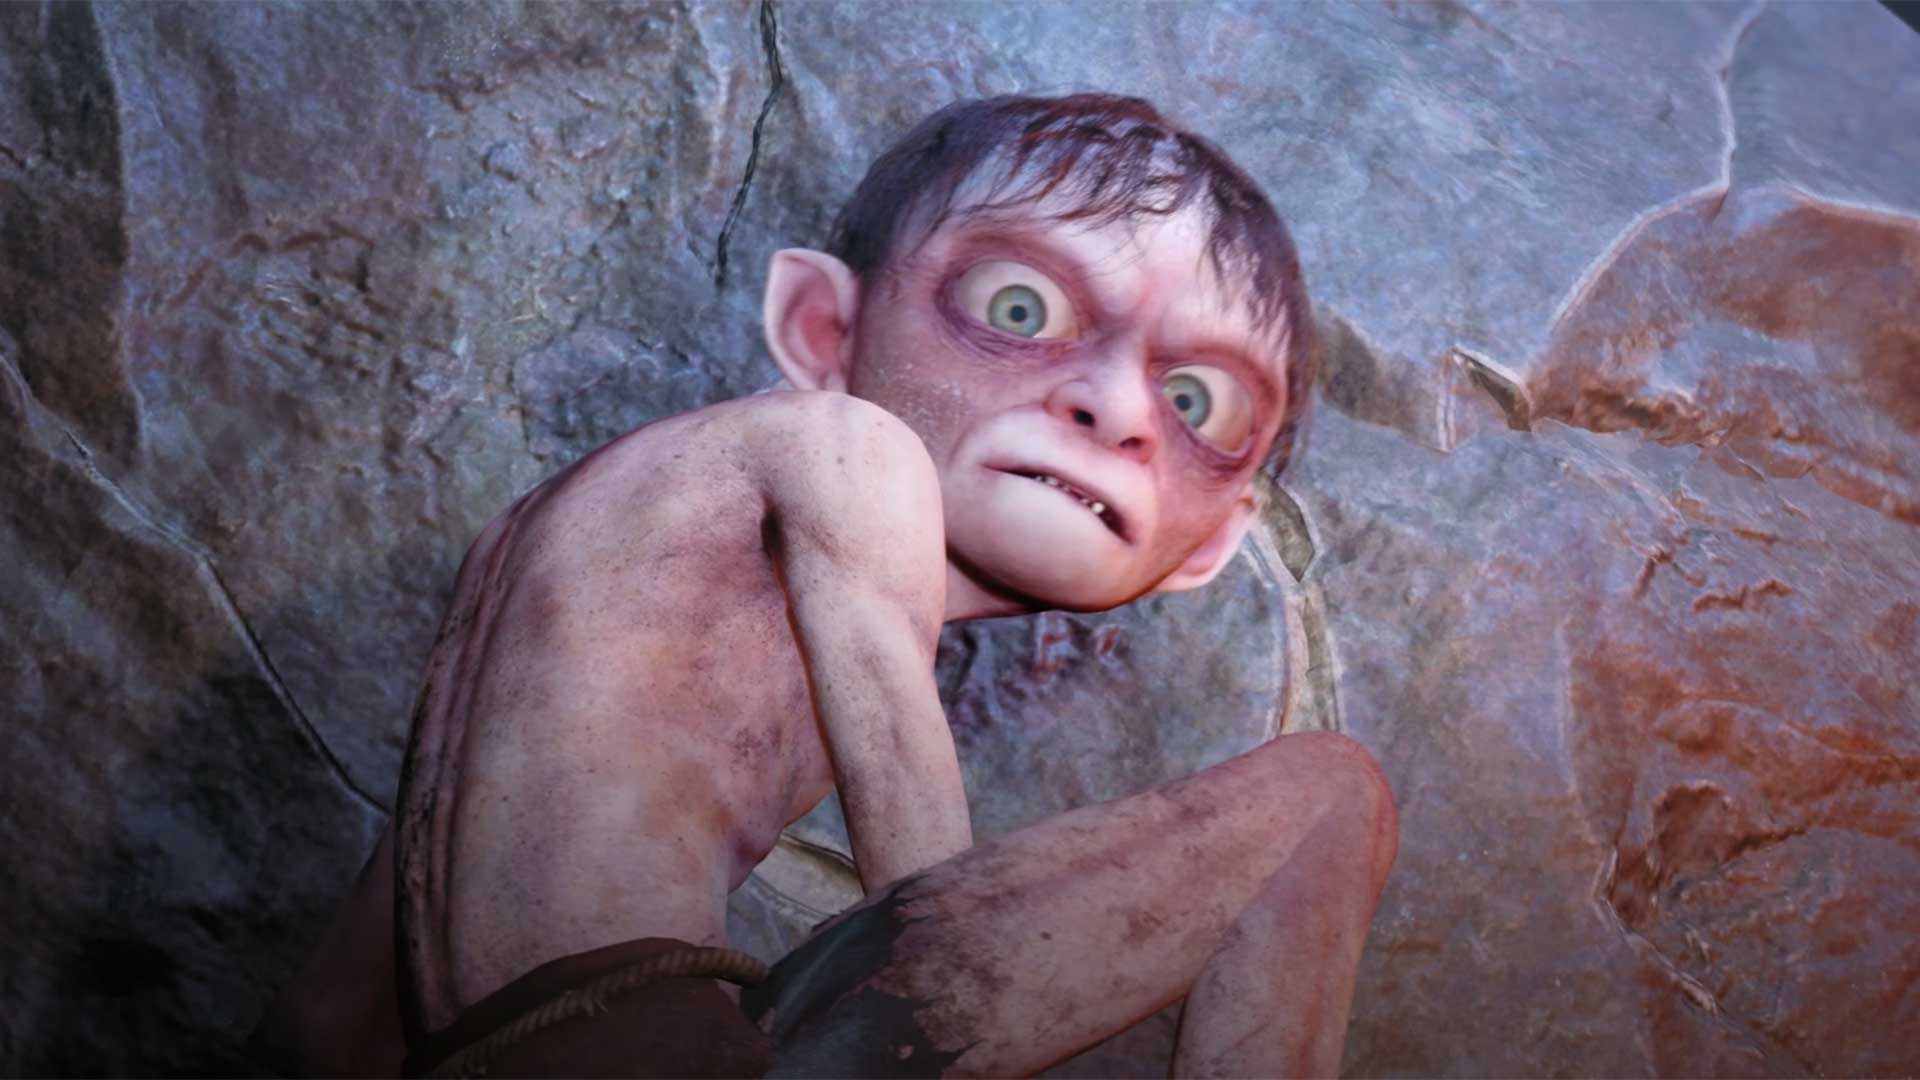 Gollum is currently the worst rated game of